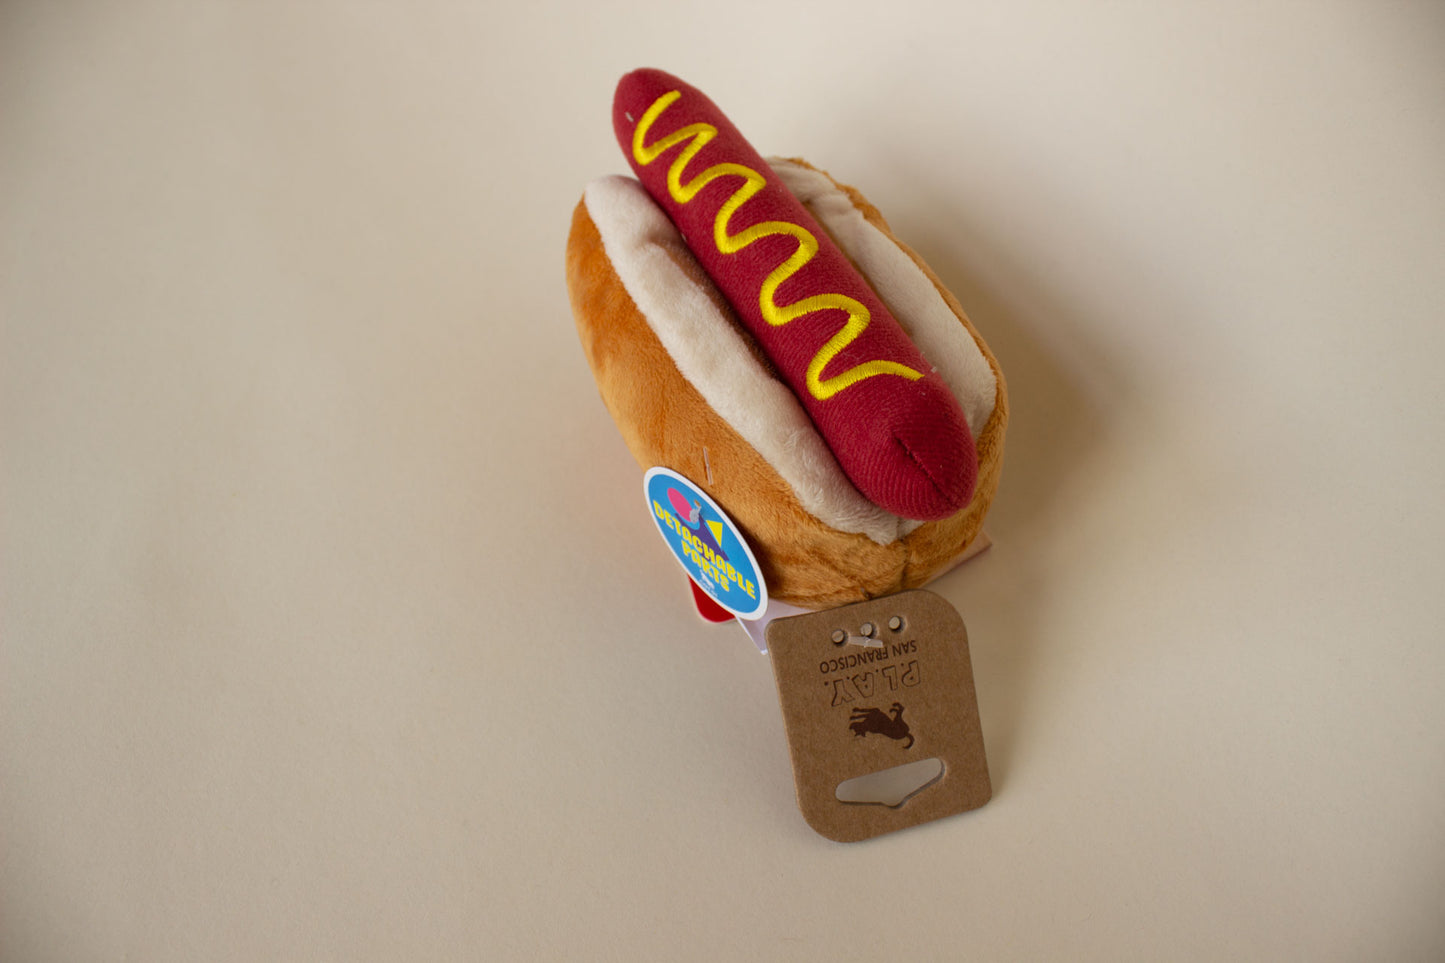 American Classic Toy - Hot Dog